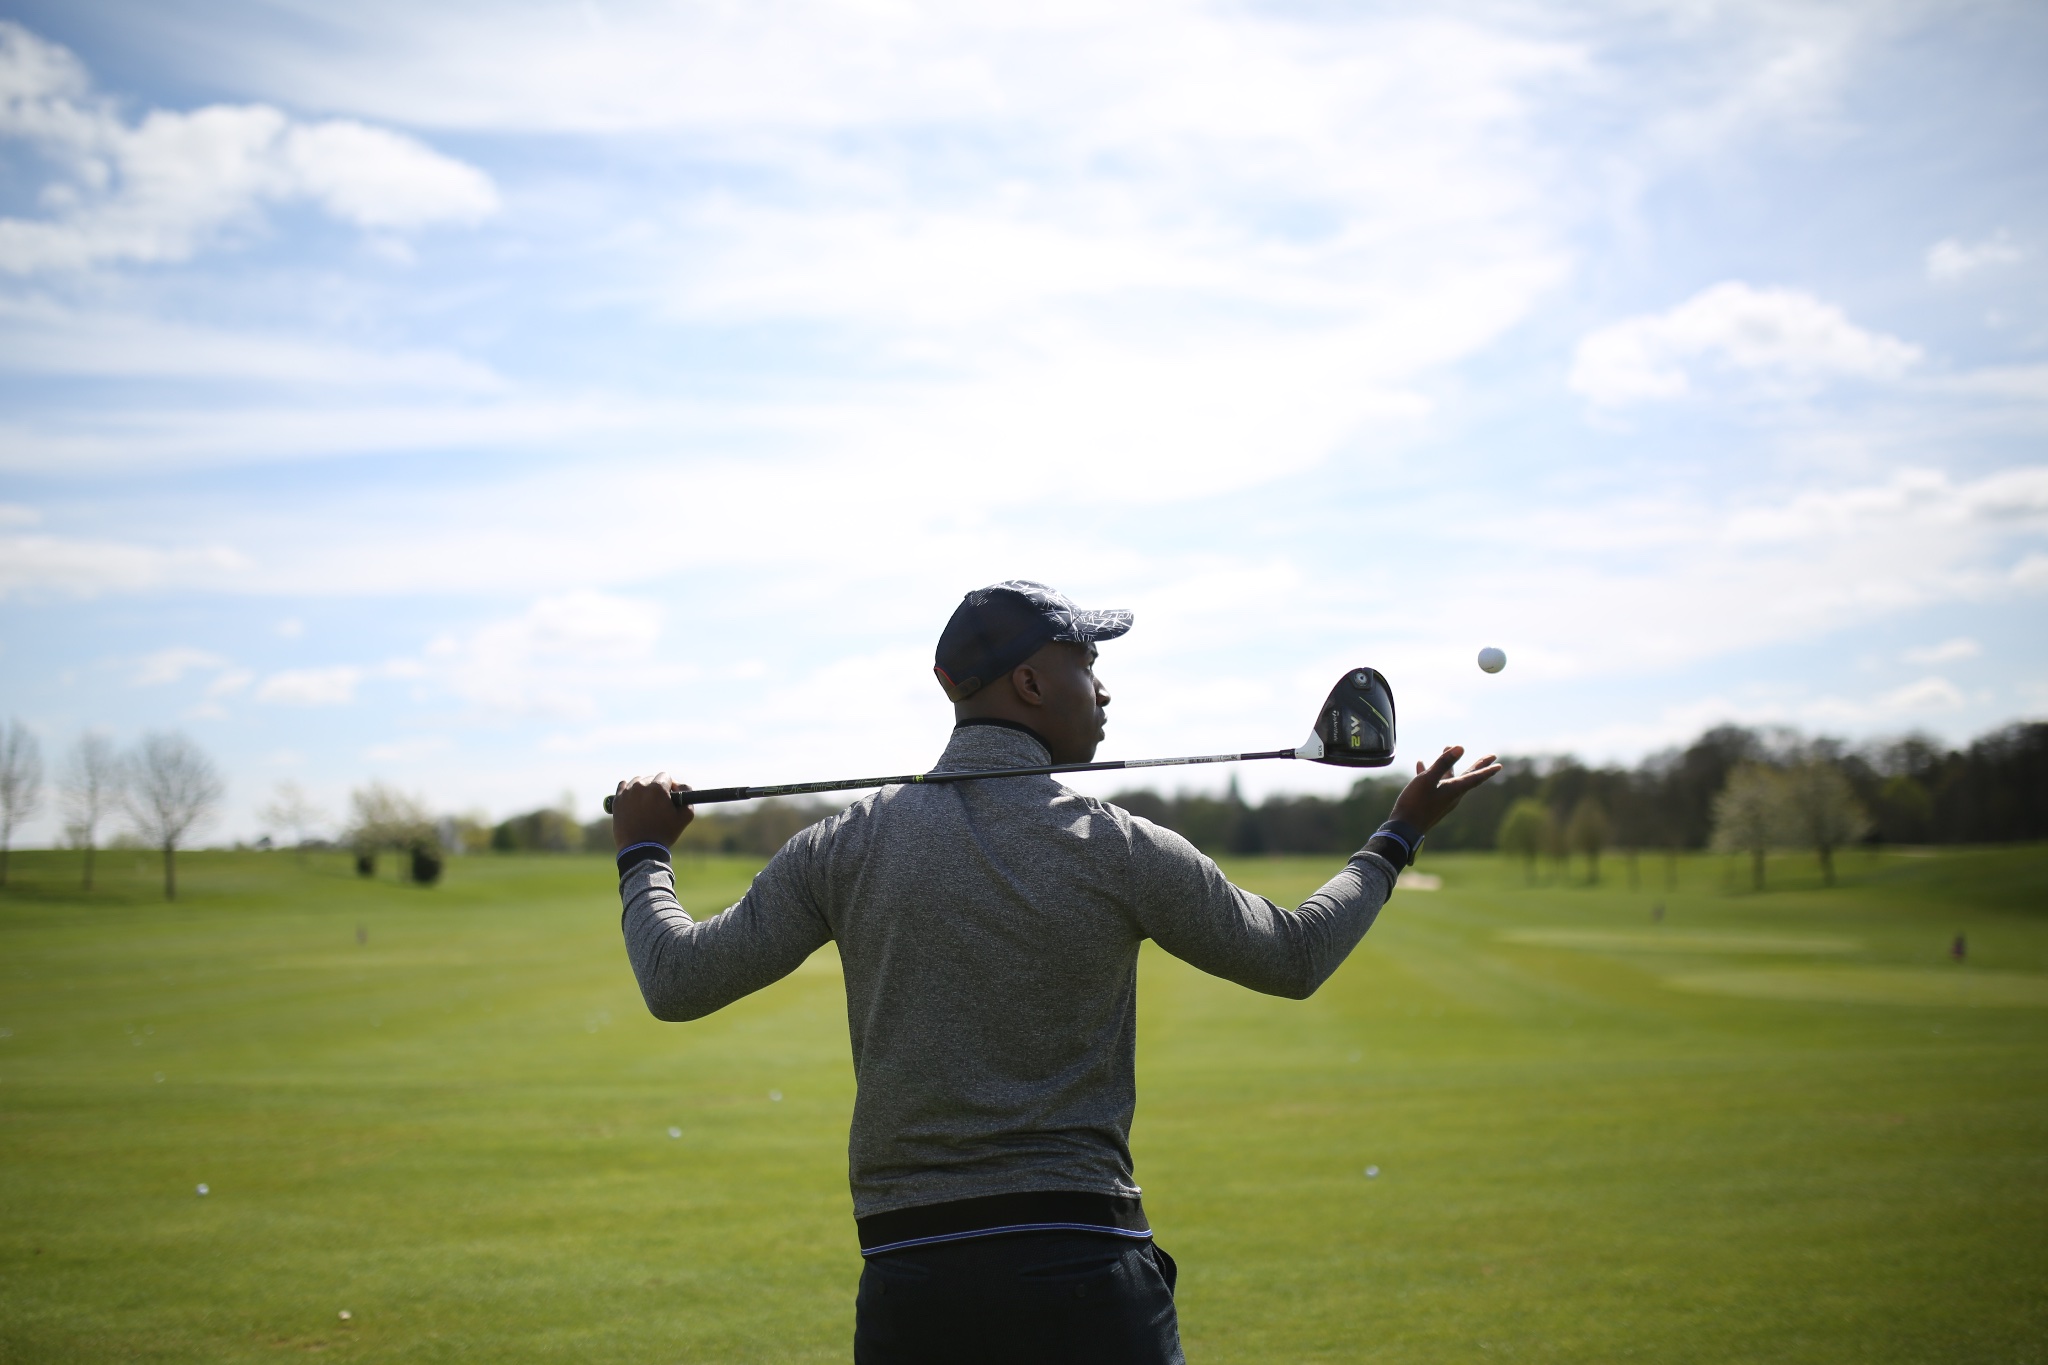 Tee off in Style with Ted Baker Golf Wear